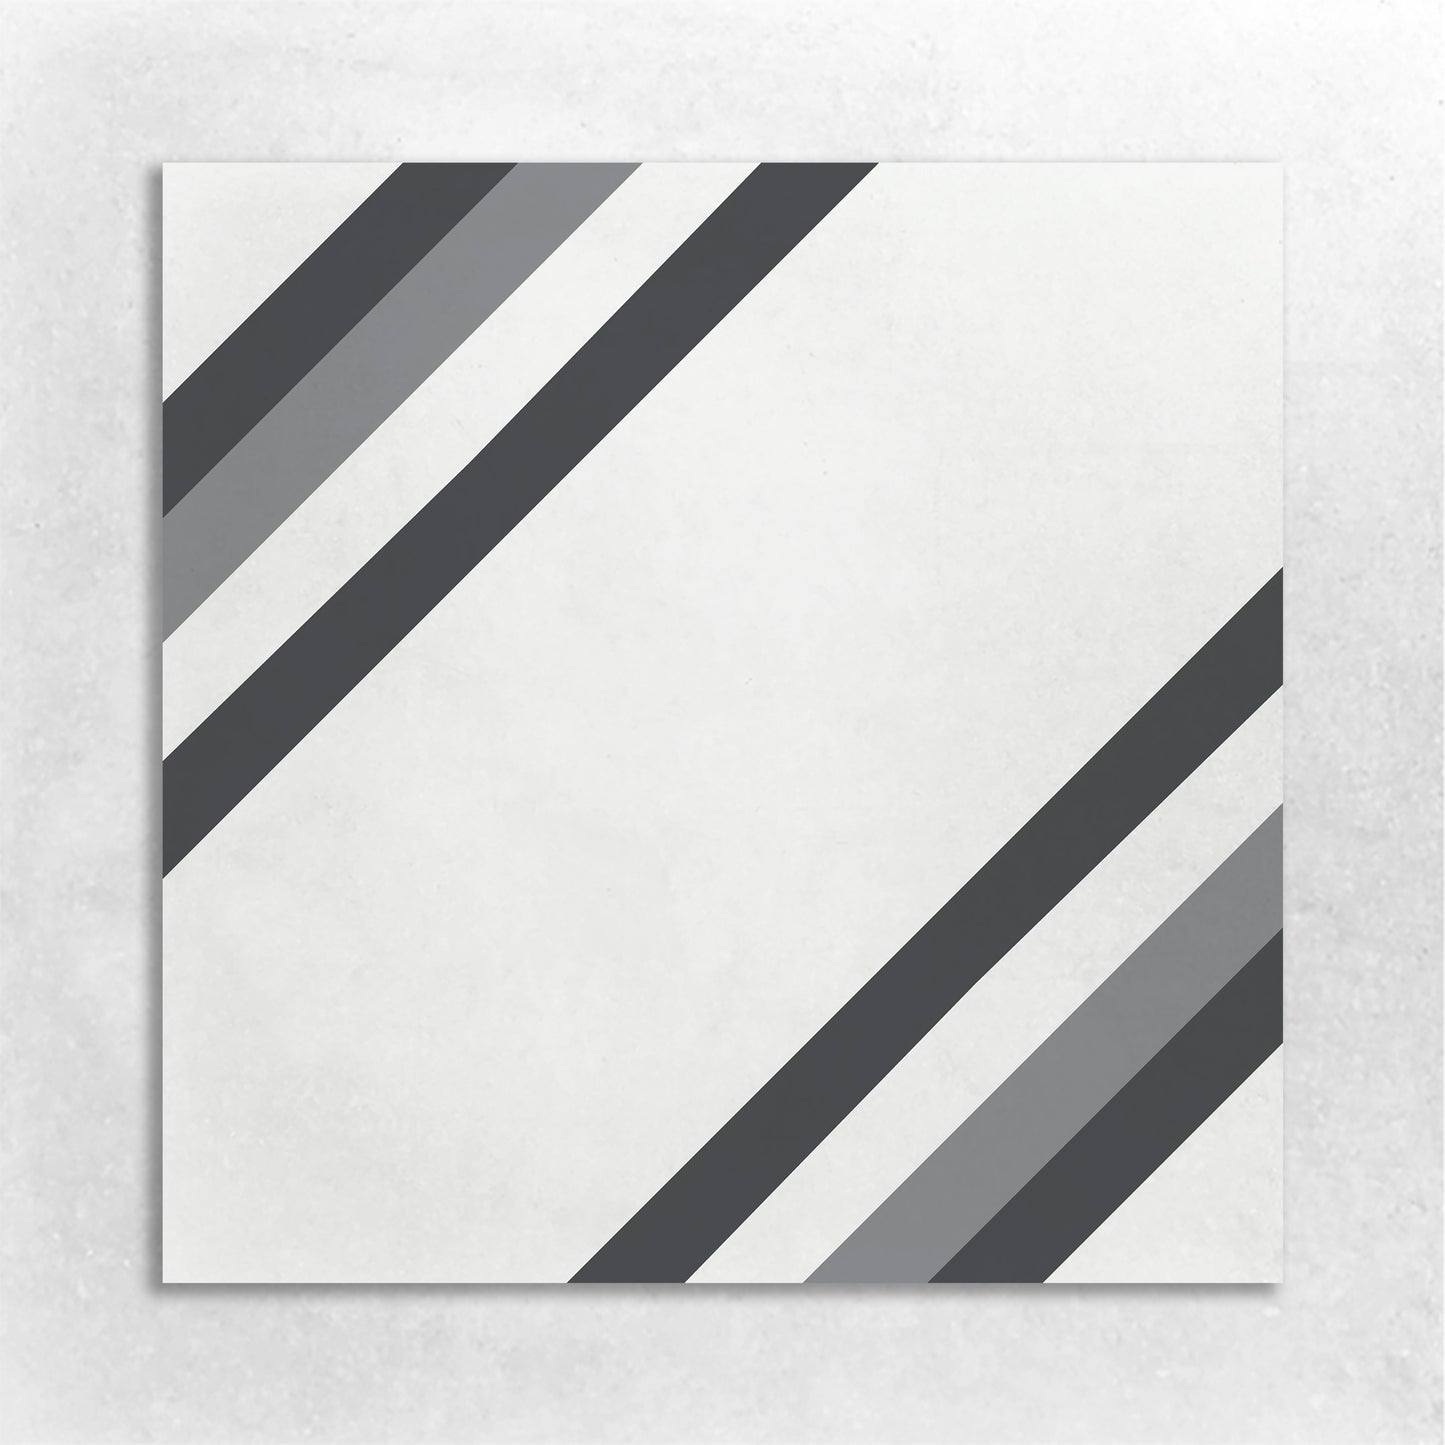 A white square tile bordered in Black, white, and grey stripes